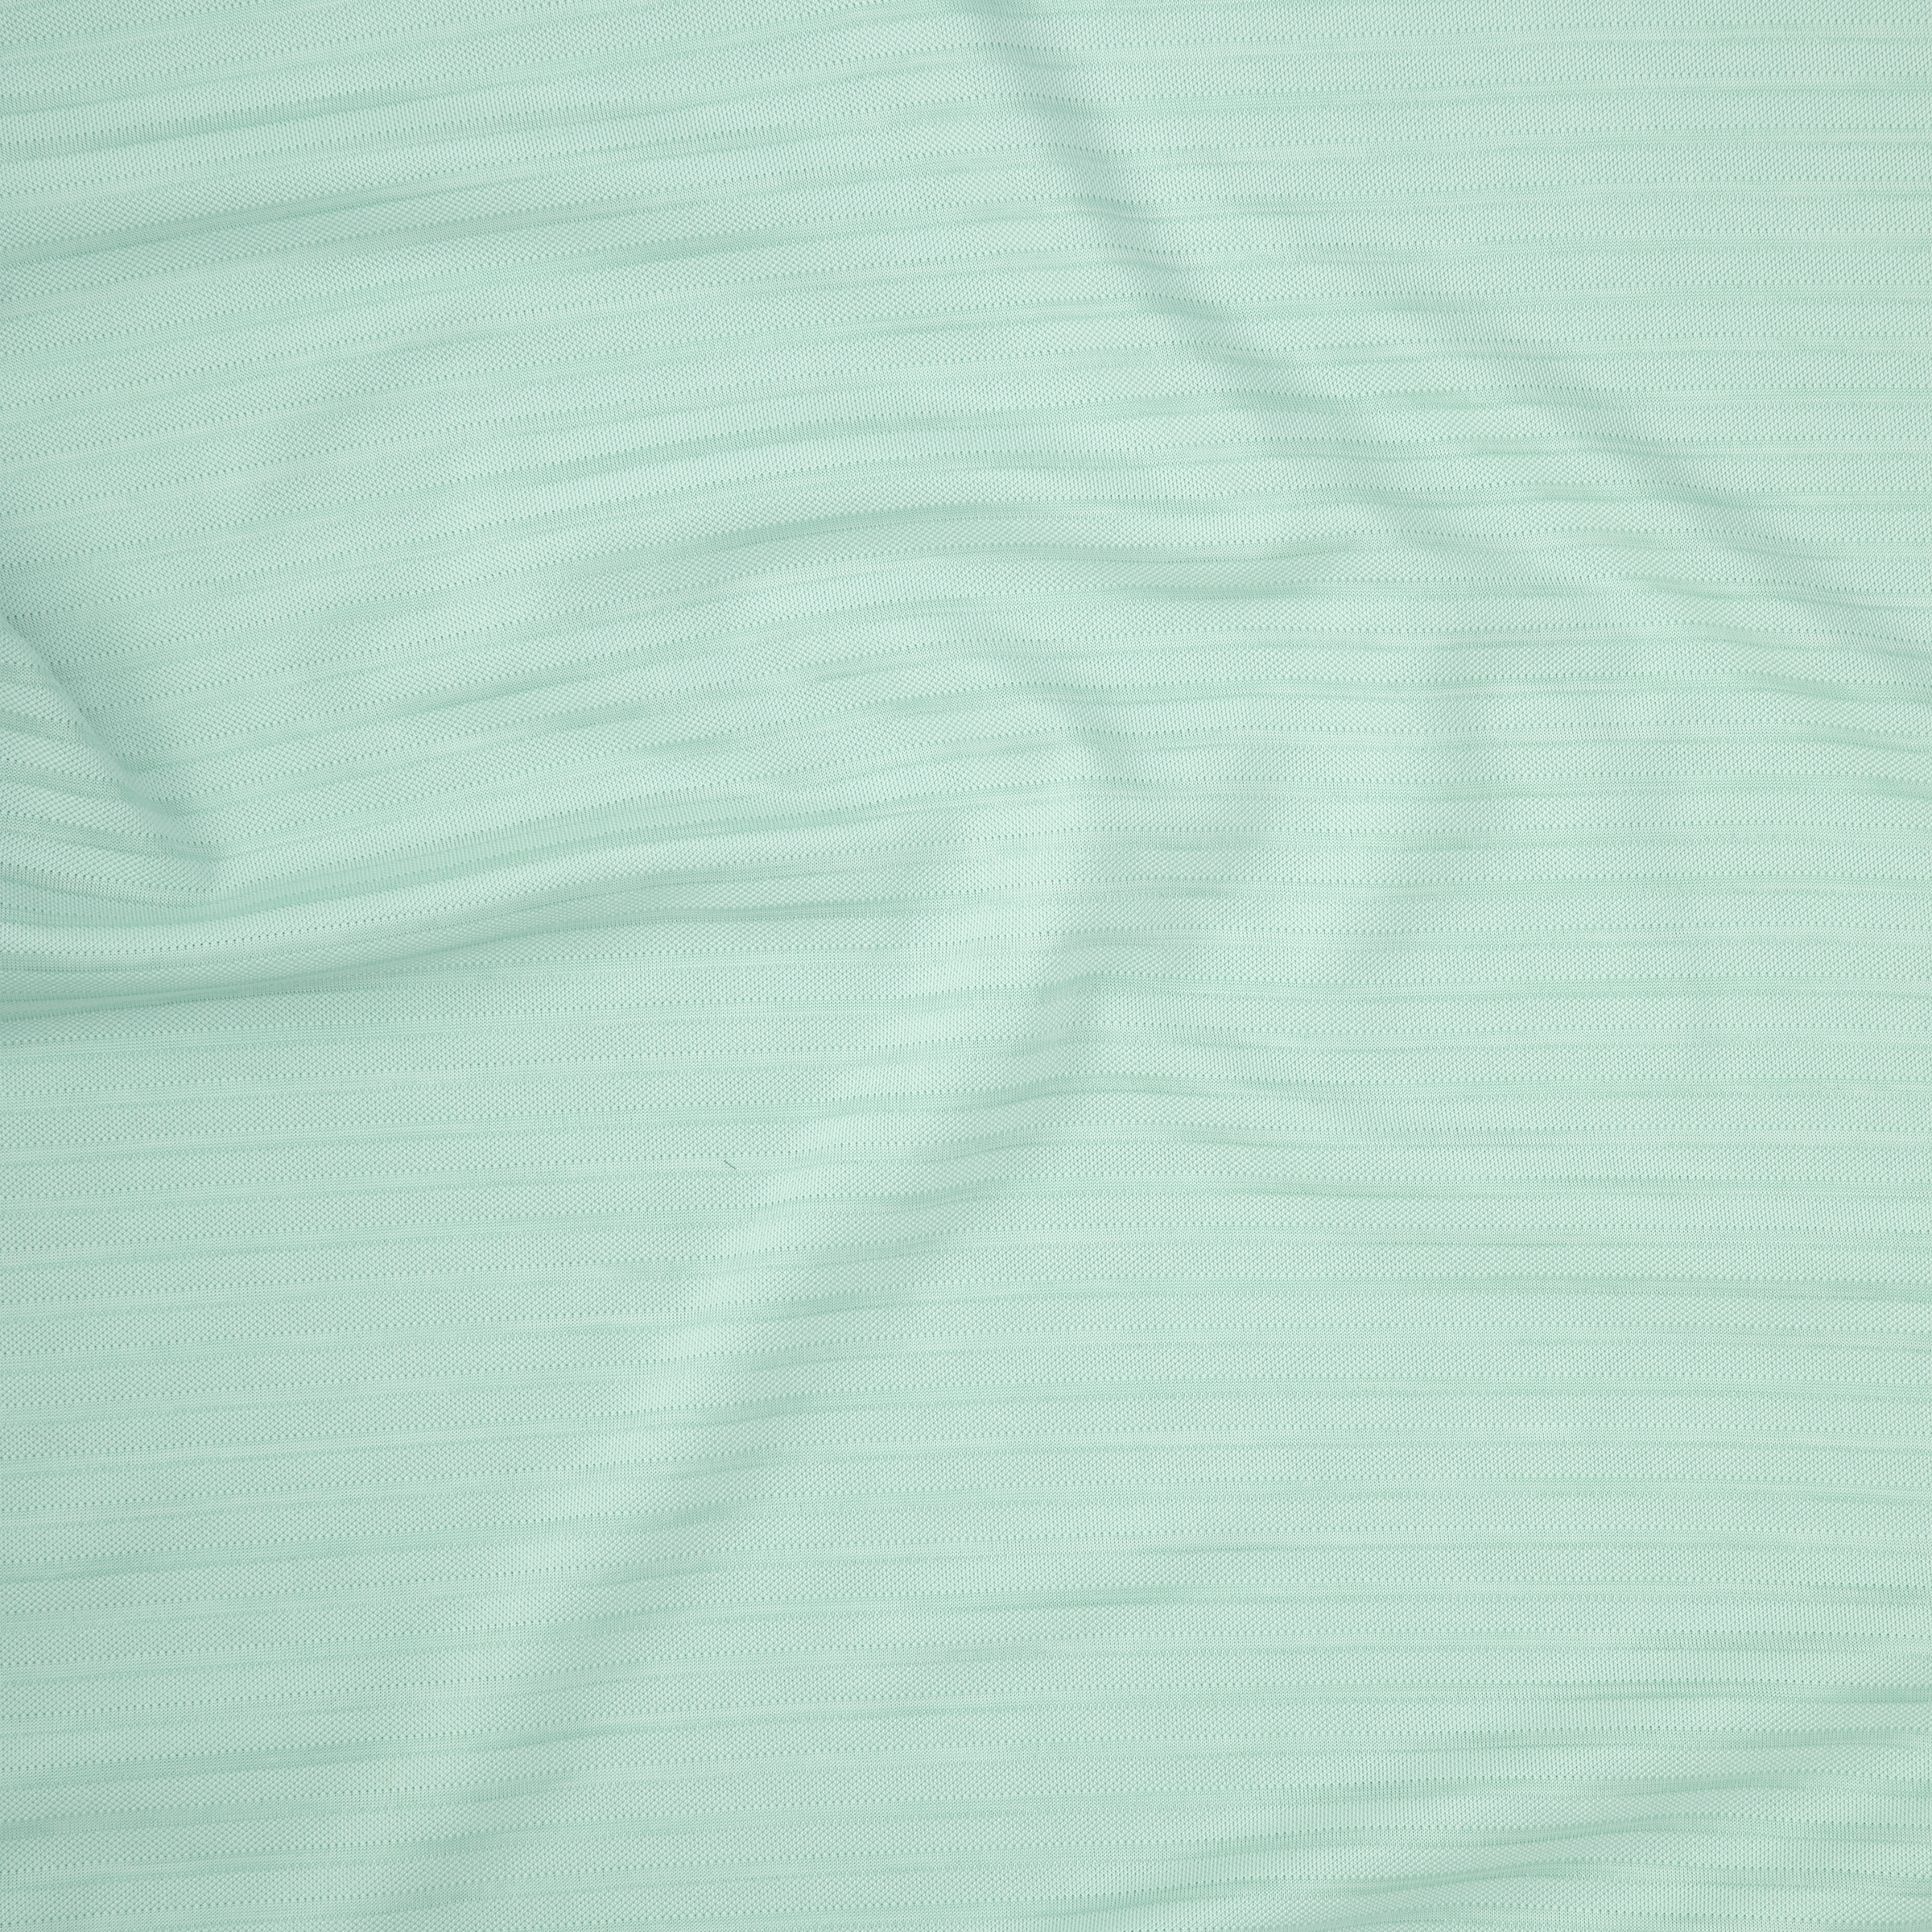 Stride Tee Mint Stripe close up of fabric texture